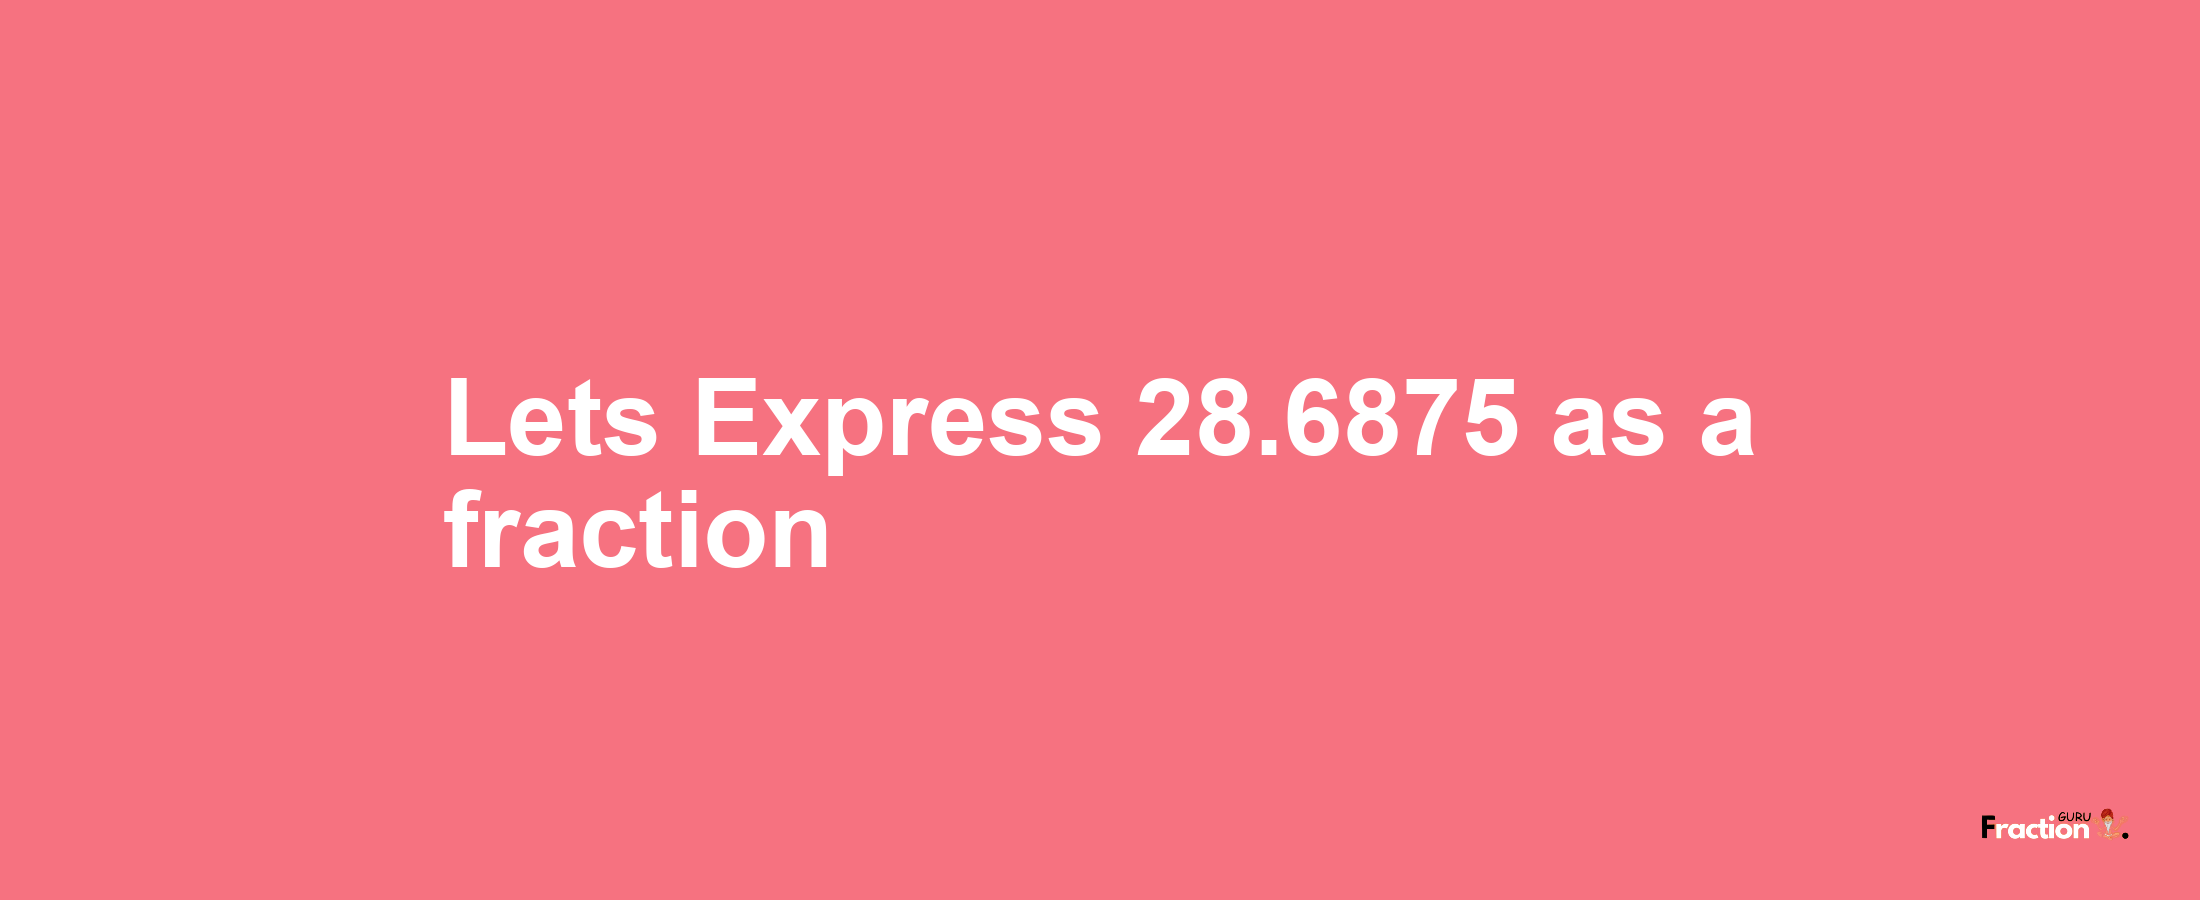 Lets Express 28.6875 as afraction